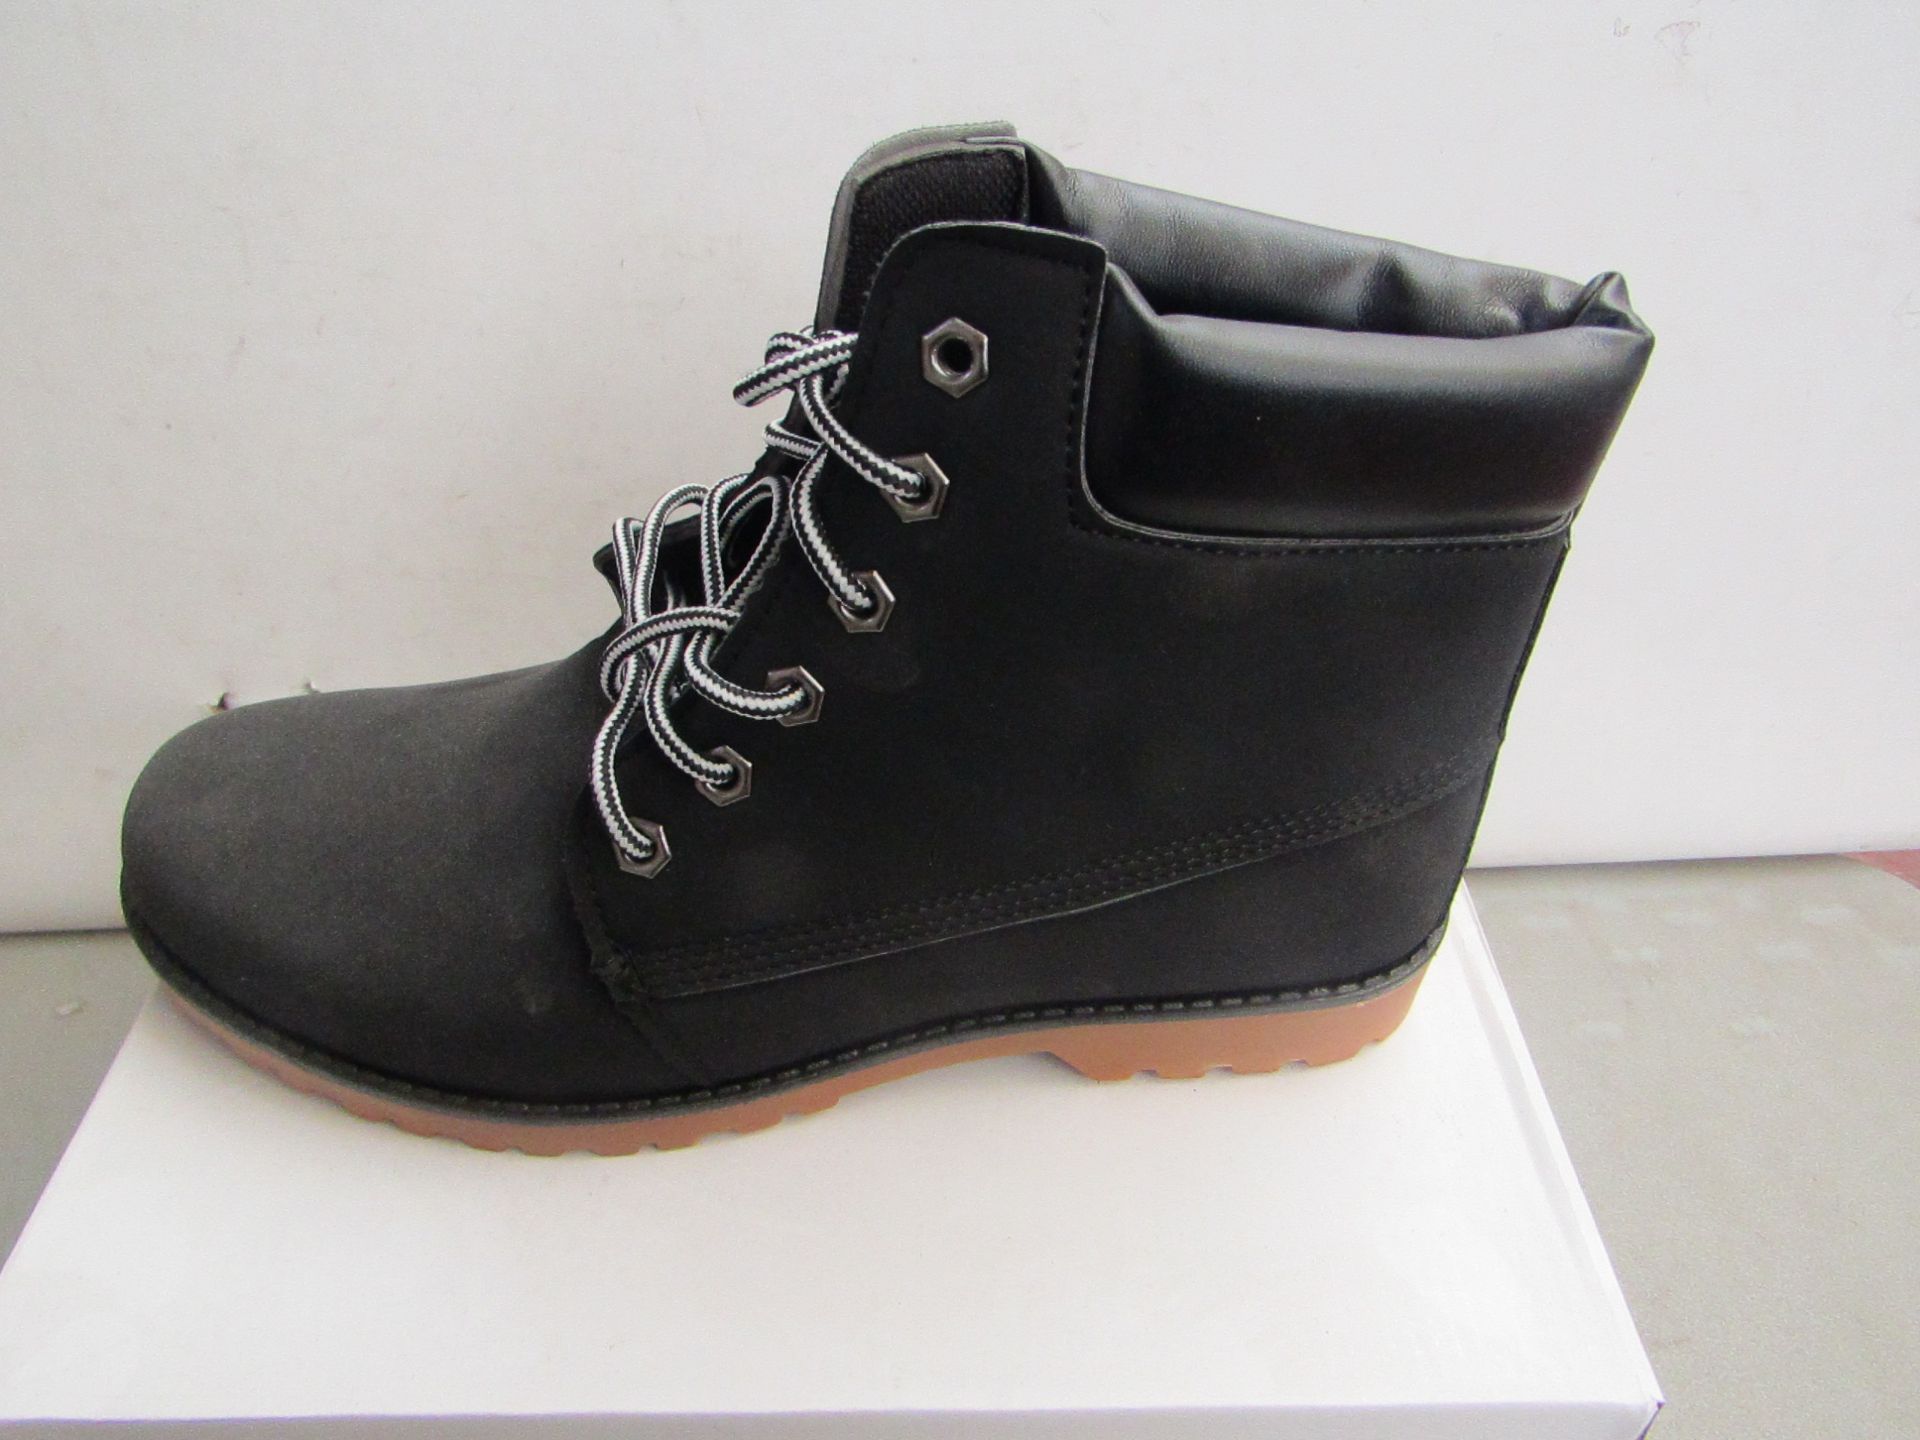 Black Fashion Boots size EU 42 new and boxed.